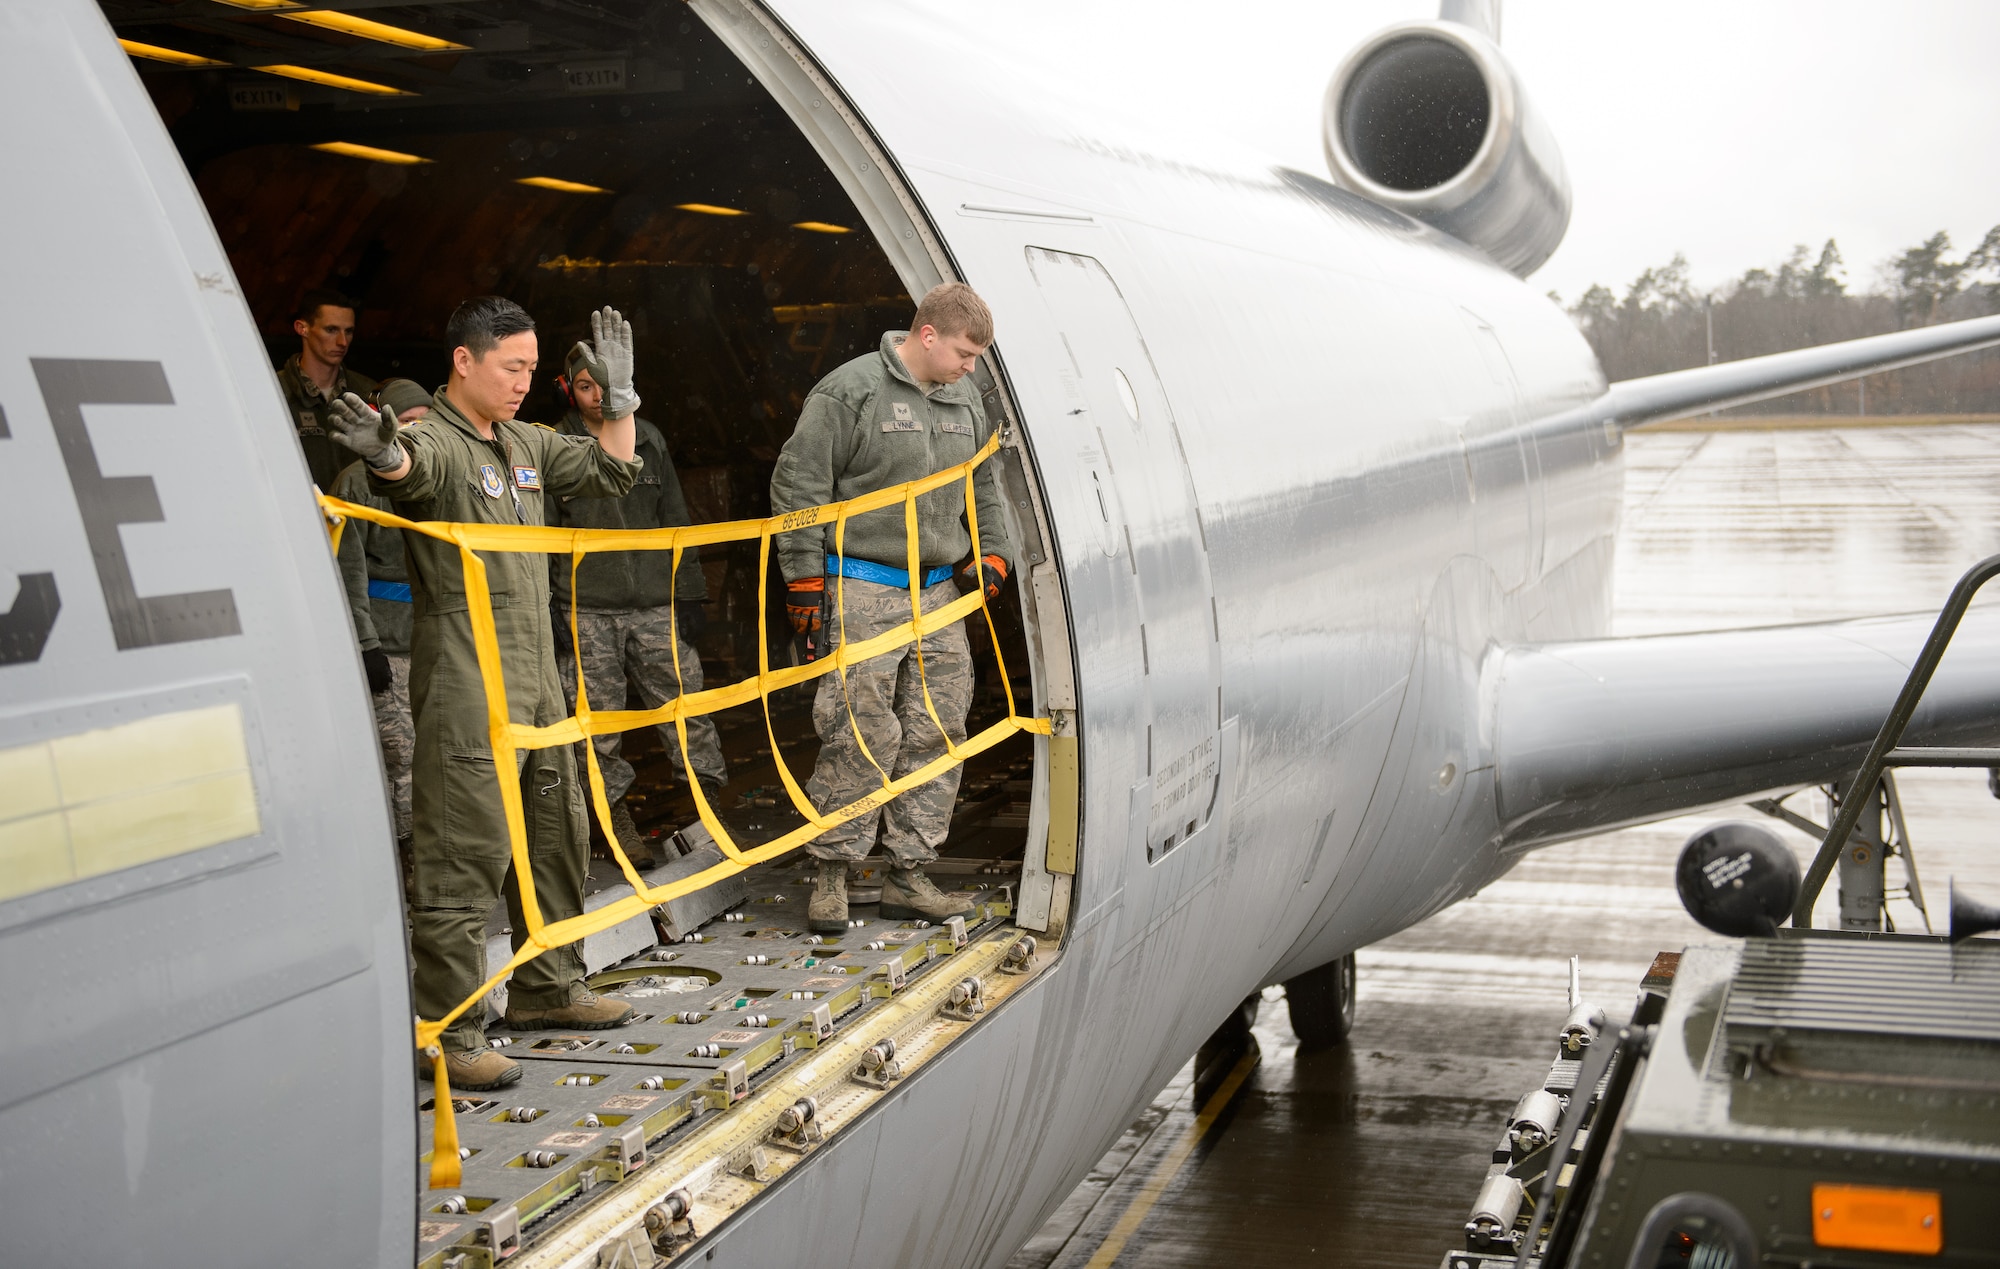 Airmen from the 721st Aerial Port Squadron and 76th Air Refueling Squadron move a cargo off-loading vehicle in to place at Ramstein Air Base, Germany, March 25, 2016. The cargo the Airmen moved was not a normal load as it was part of a humanitarian airlift proving more than 285,000 meals to children in Afghanistan. (U.S. Air Force photo/Staff Sgt. Armando A. Schwier-Morales)